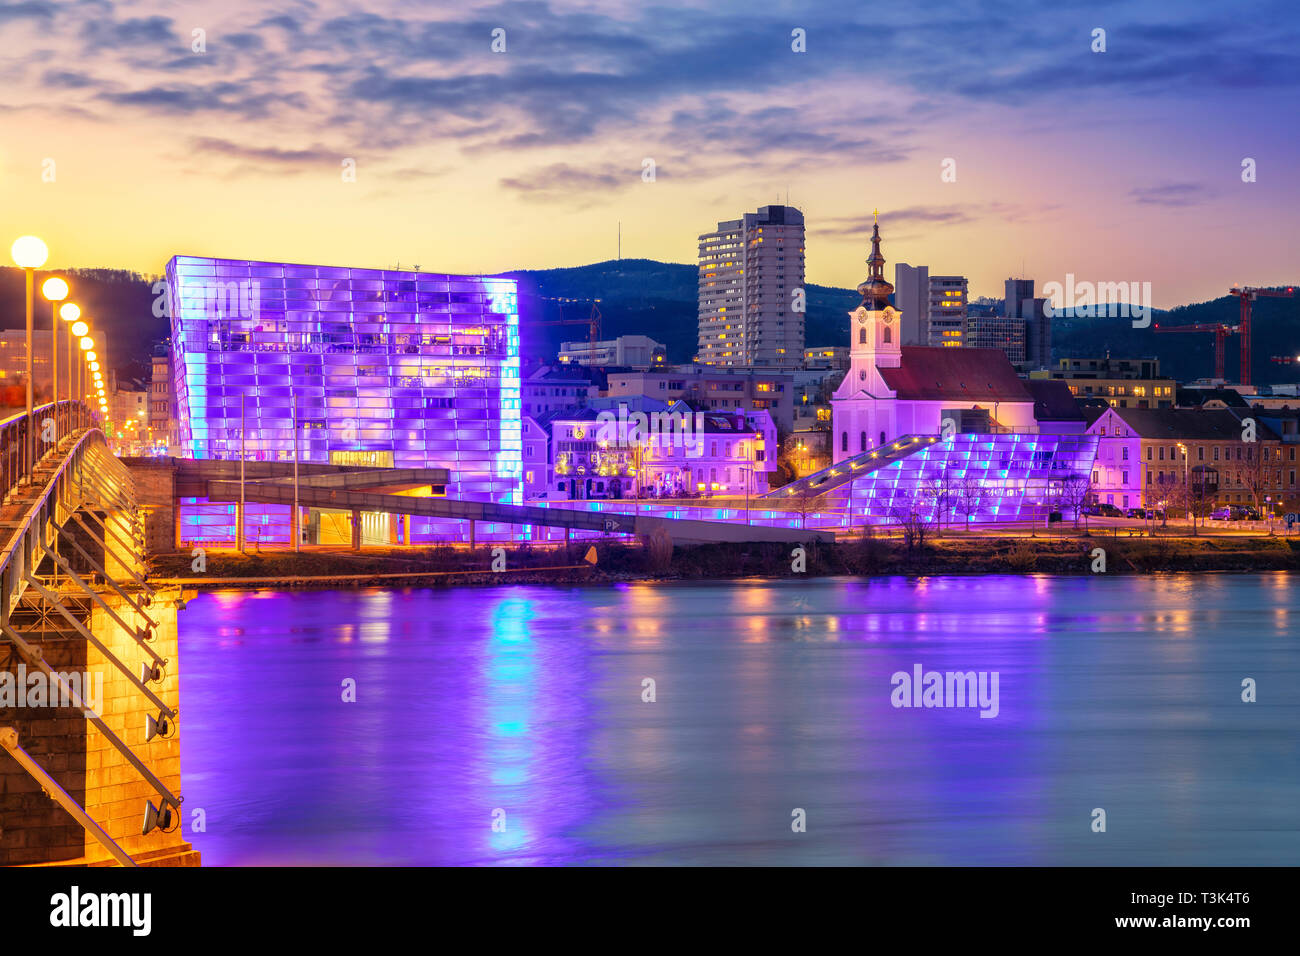 Linz, Austria. Cityscape image of riverside Linz, Austria during twilight blue hour with reflection of the city lights in Danube river. Stock Photo